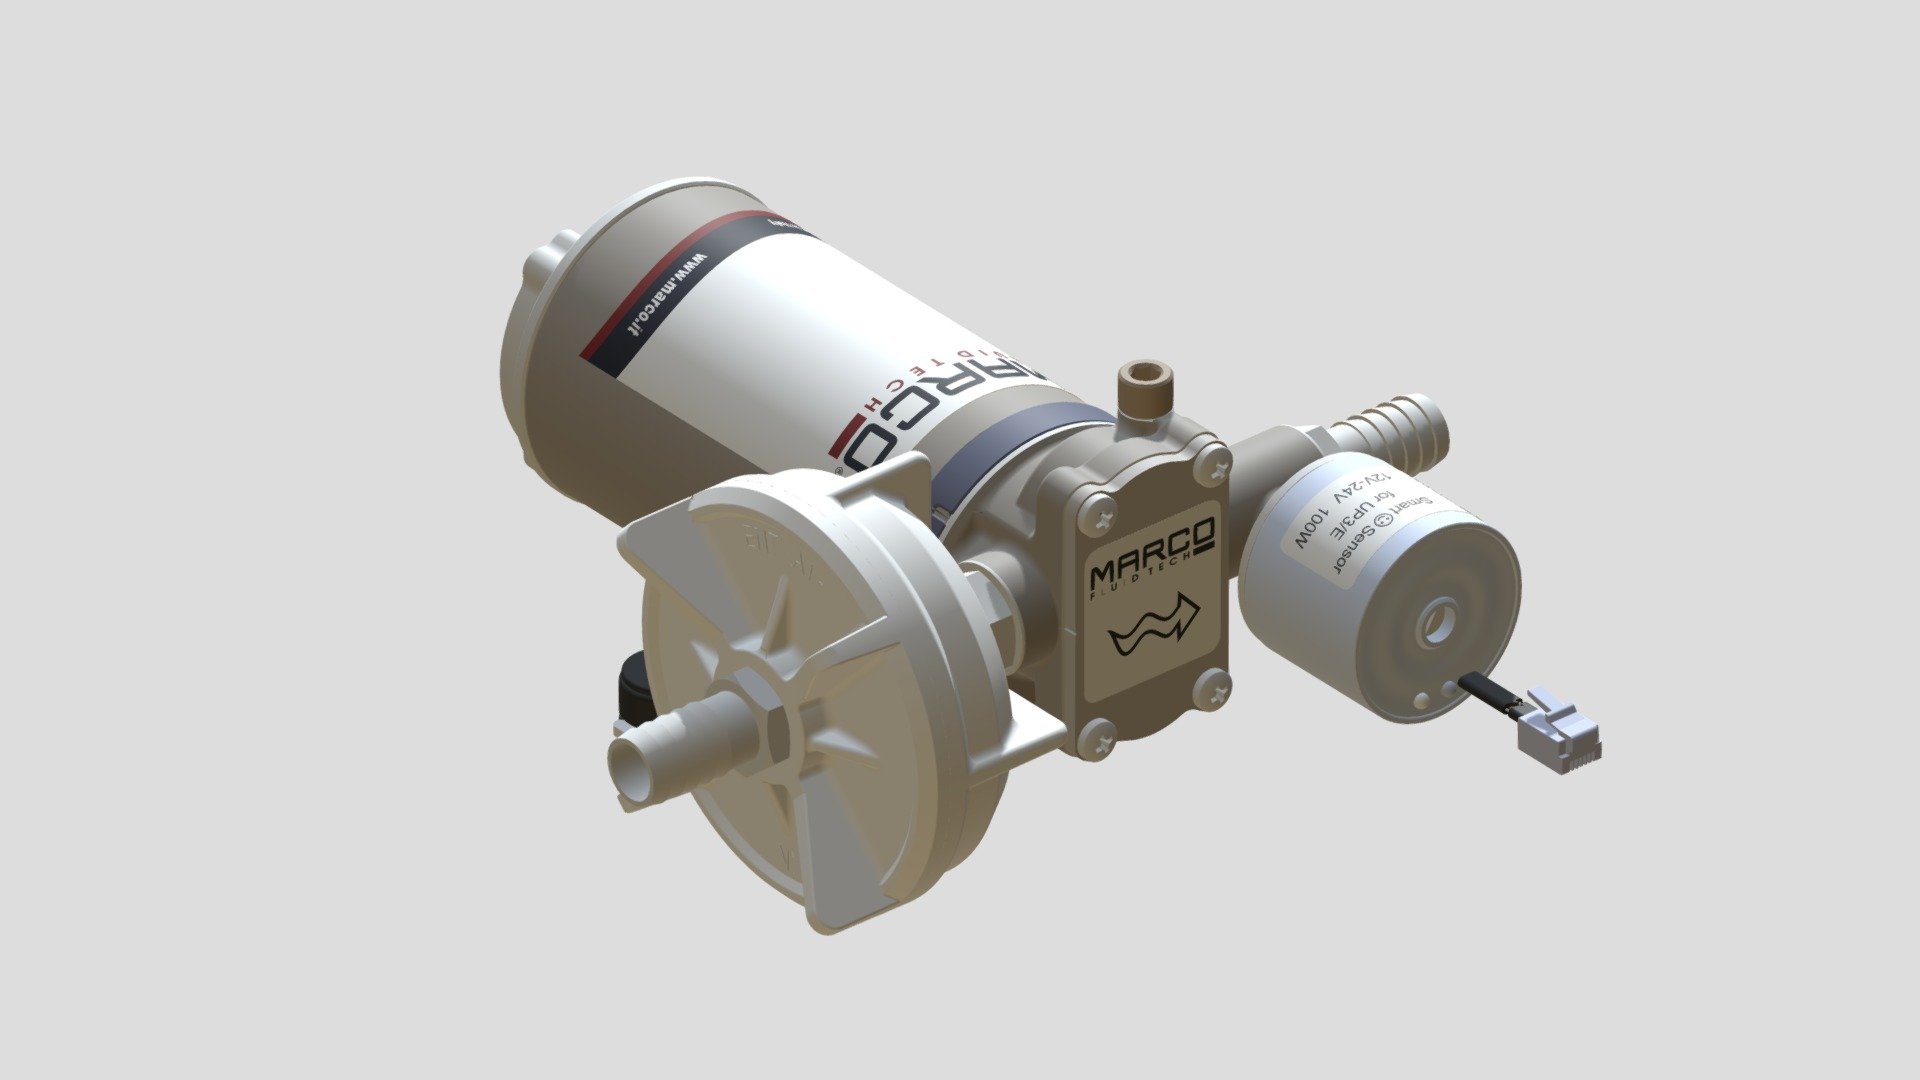 UP8/E electronic water pressure system 10 l/min
Self-priming automatic electric pump with helical PEEK gears, integrated check valve and electronic control. Nickel-plated brass body and stainless steel shaft. Main applications: fresh water pressure systems and shower kits on boats, rubber dinghies, sailing boats and campers 3d model